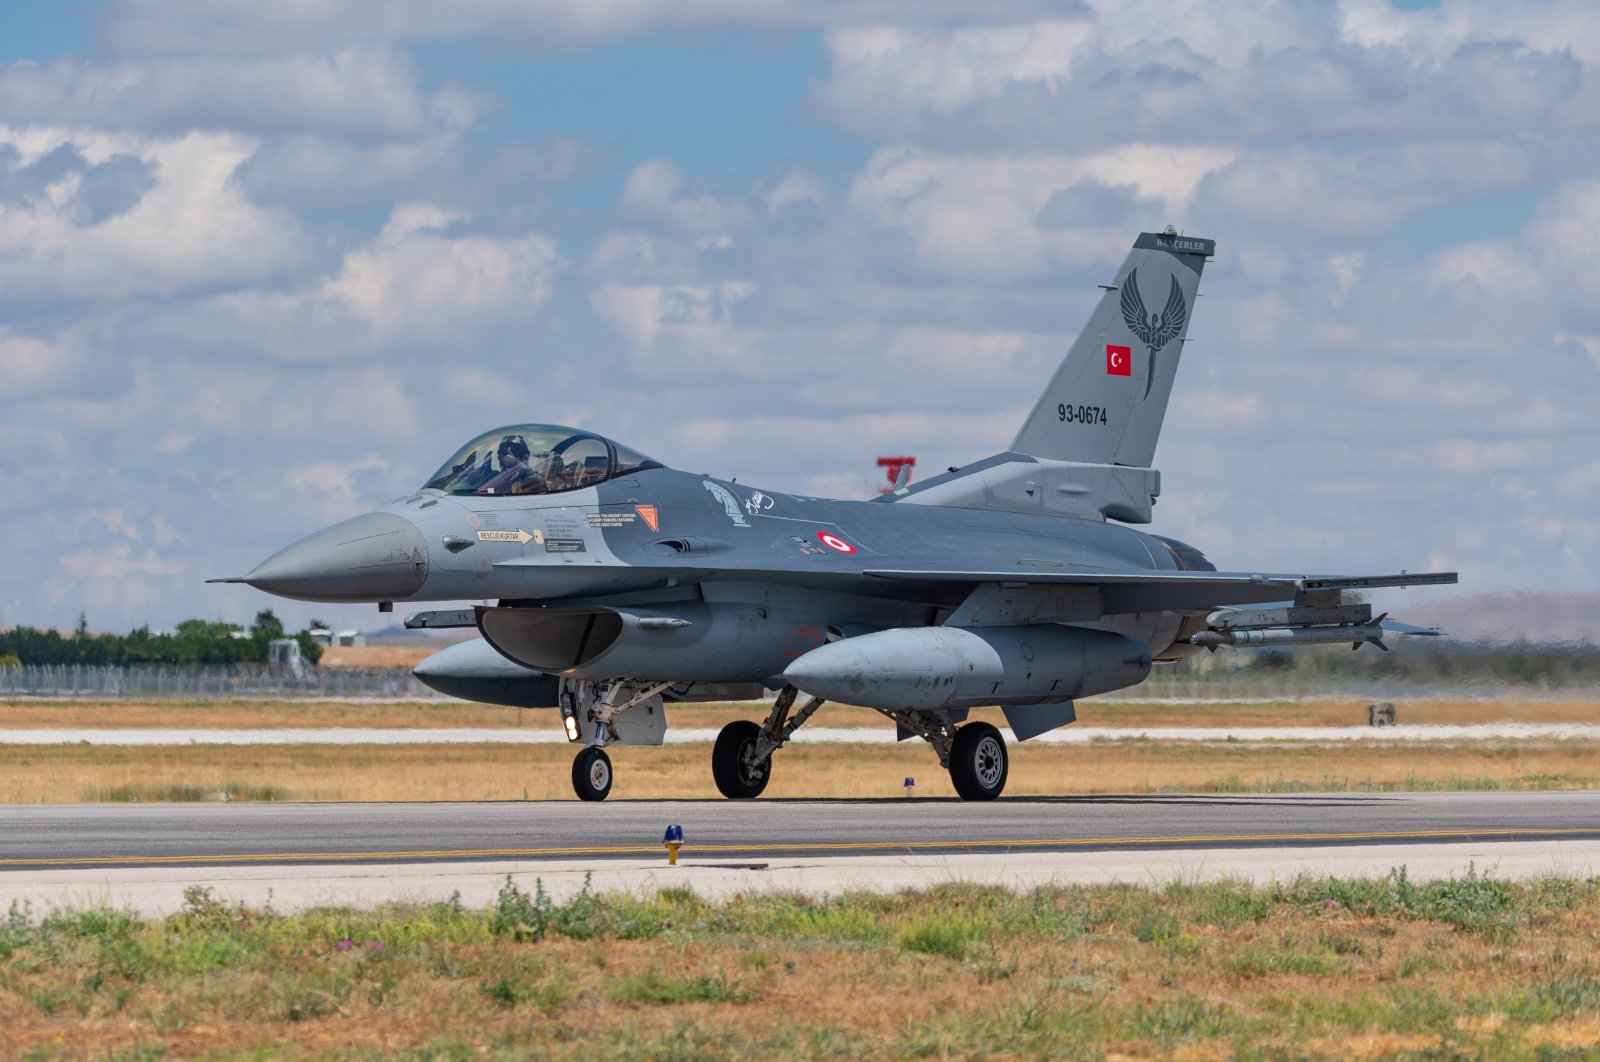 Several F-16s of the Turkish Air Forces Command and several other allied air forces gather for a military exercise known as Anatolian Eagle, in Konya, central Türkiye, June 30, 2022. (Shutterstock Photo)